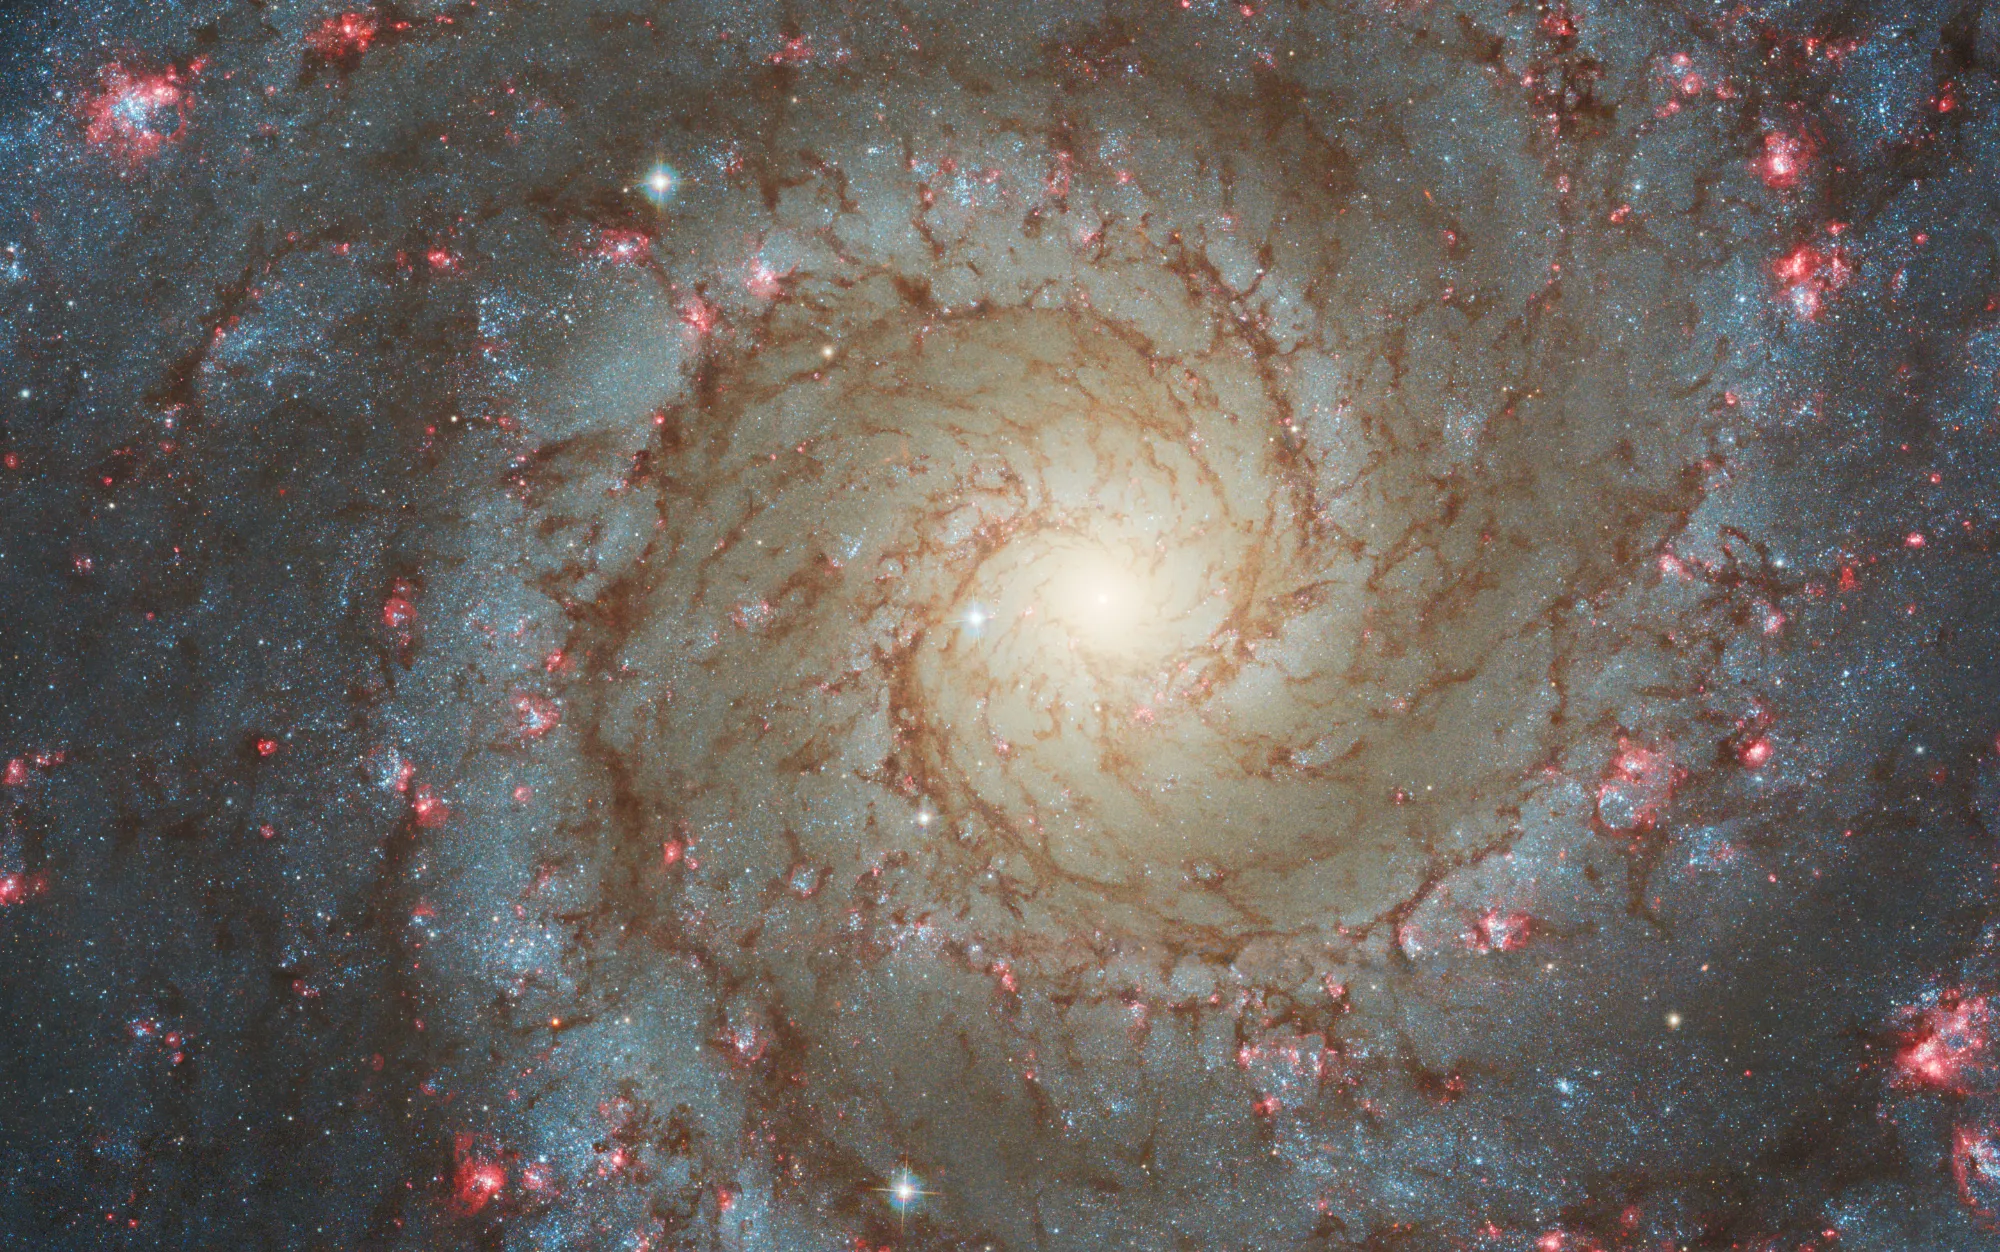 Hubble’s image of NGC 628 shows a densely populated face-on spiral galaxy anchored by its central region, which has a light yellow haze that takes up about a quarter of the view. The core is brightest at the center, washing out light from other objects. Delicate spiral arms start near the center and extend to the edges, rotating counterclockwise. There is more brown dust beginning at the center, but as the arms extend outward, brown dust lanes alternate with diffuse lines of bright blue stars. Throughout the spiral arms, there are bright pink patches of star-forming clusters. 